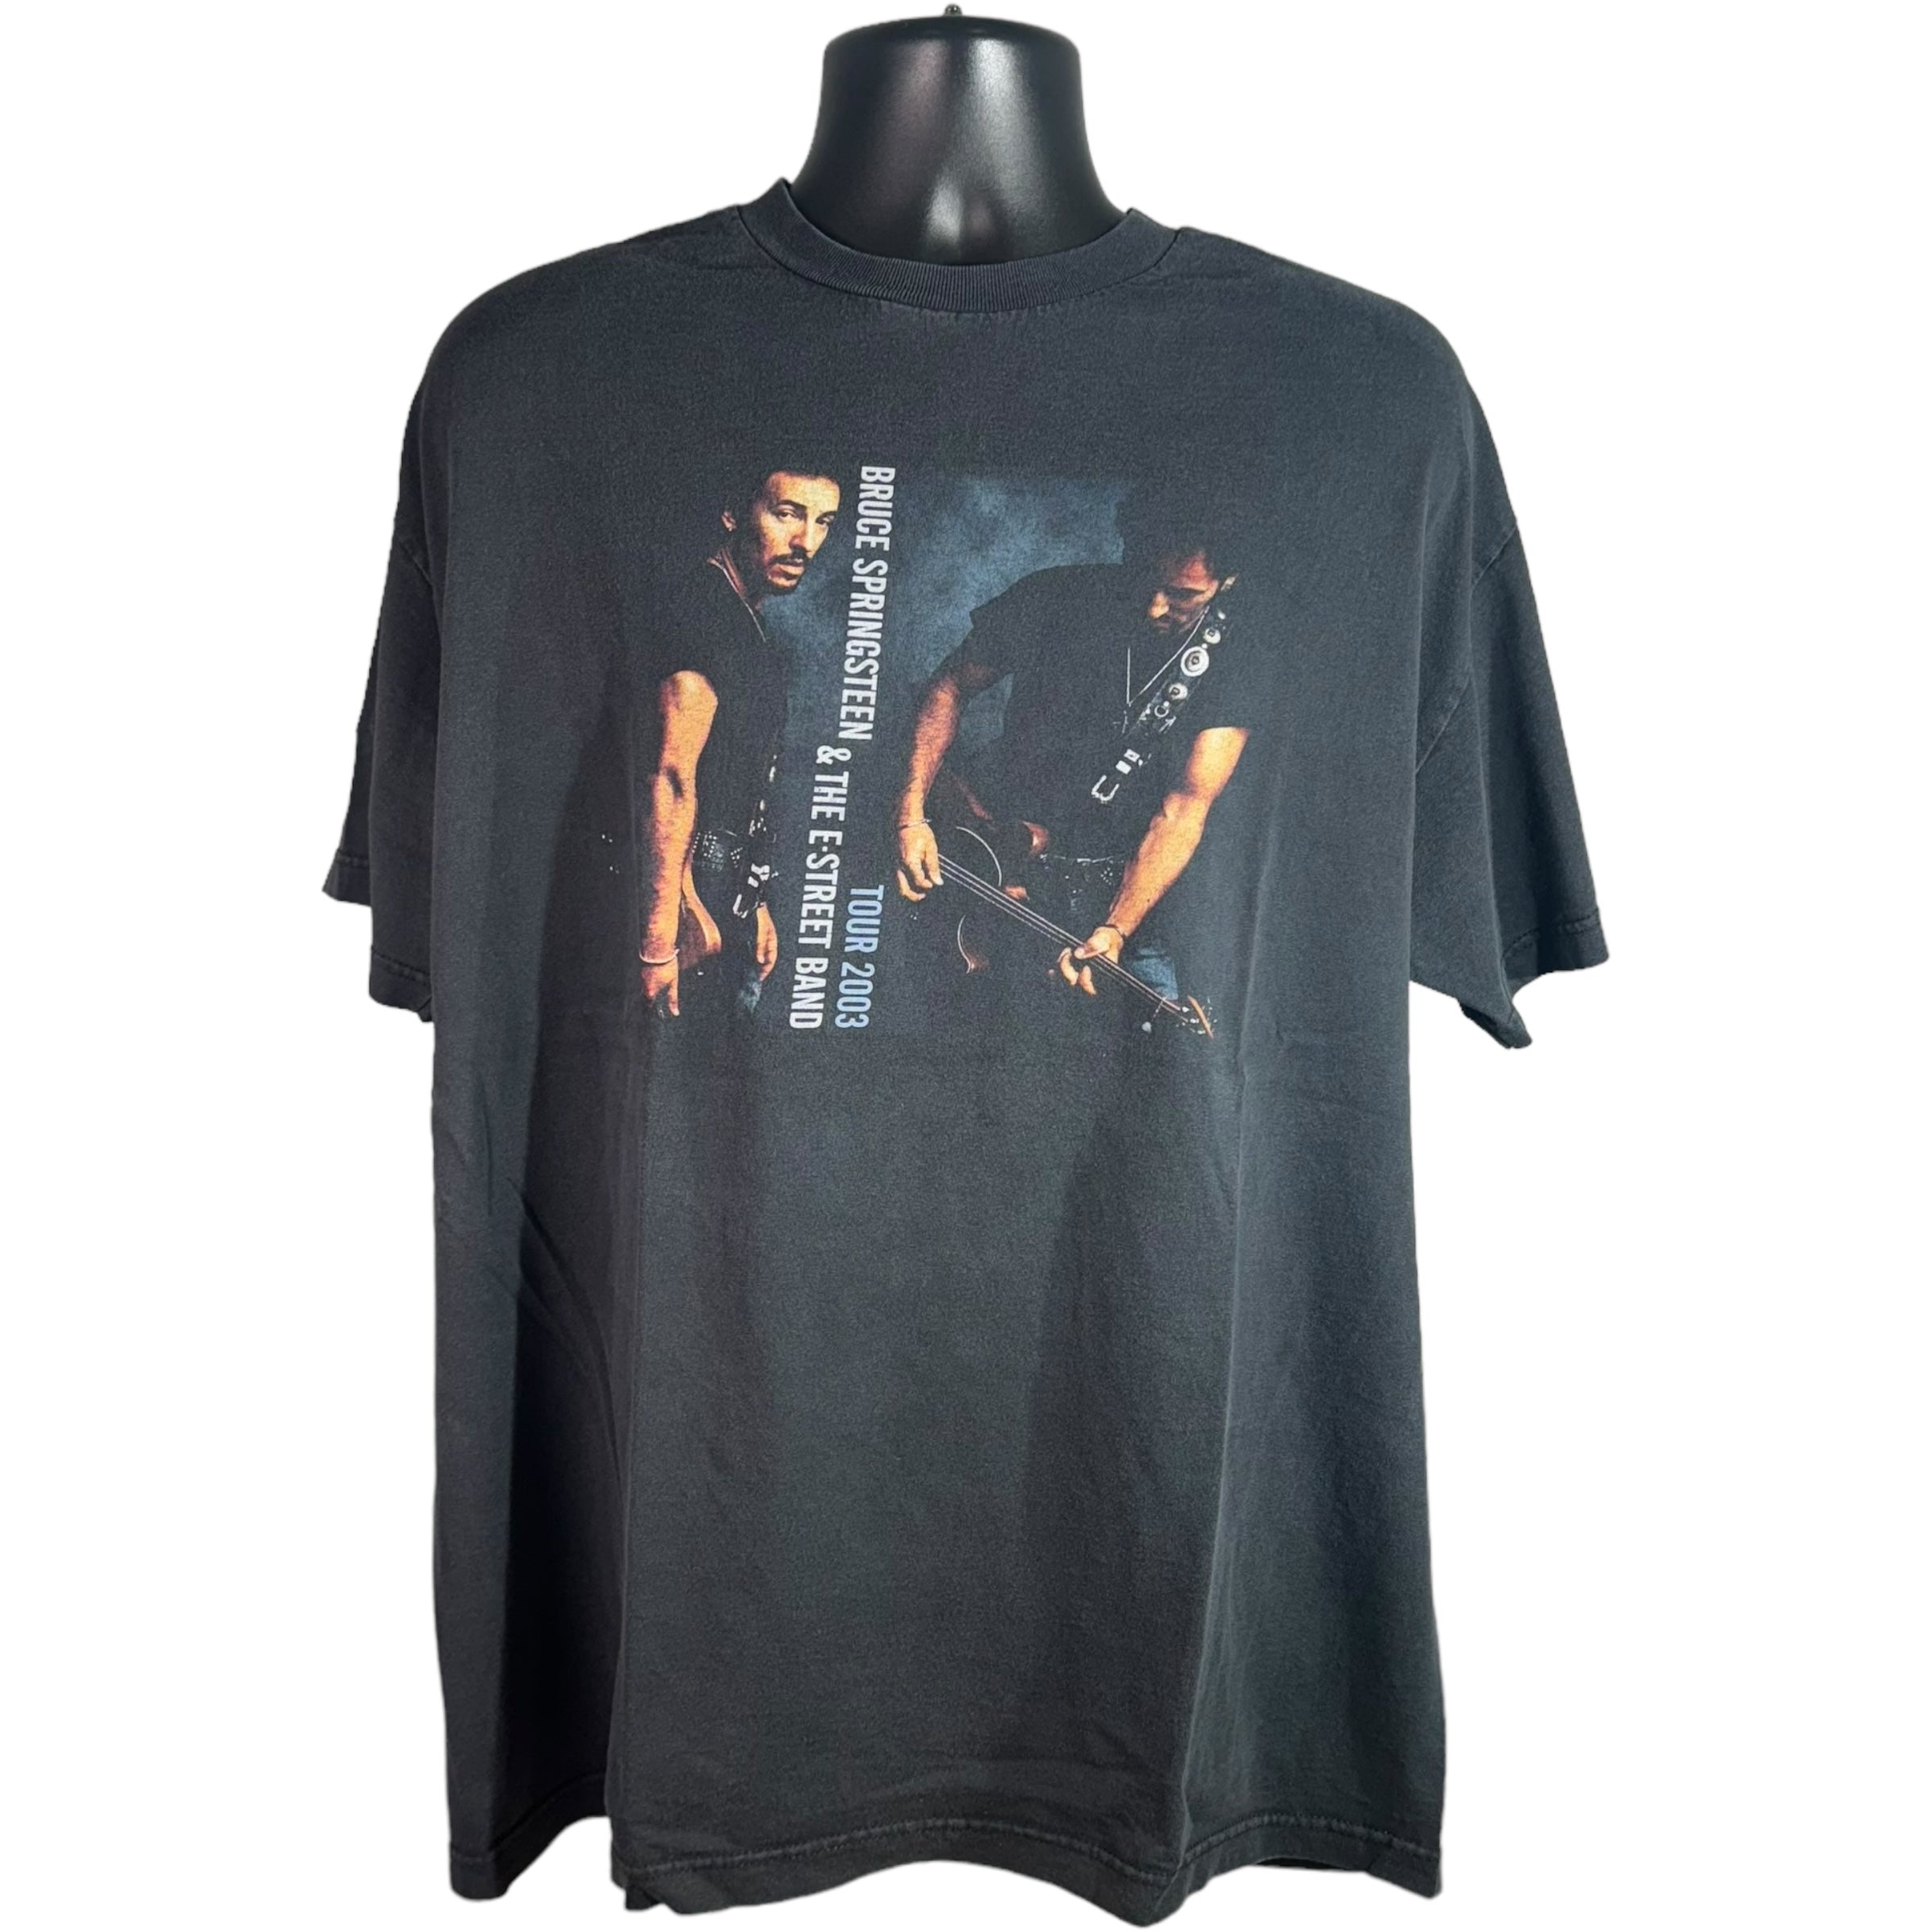 Vintage Bruce Springsteen & The E-Steet Band Tour Tee 2003